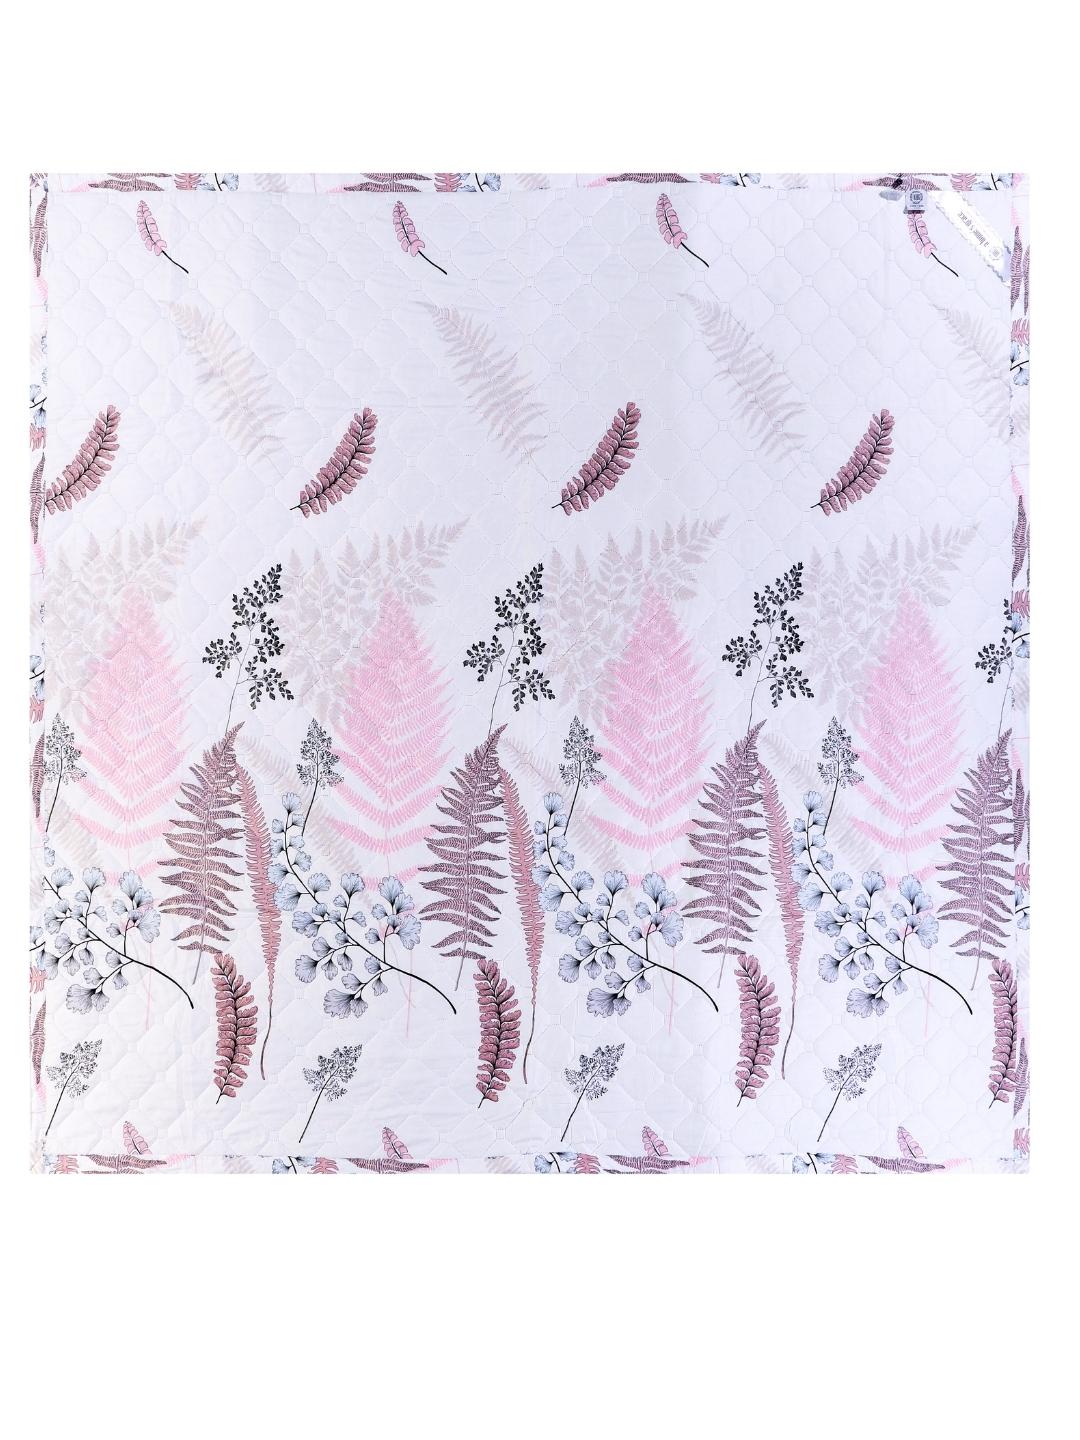 Floral Print Double Bed Light Weight Comforter-Subtle Pink